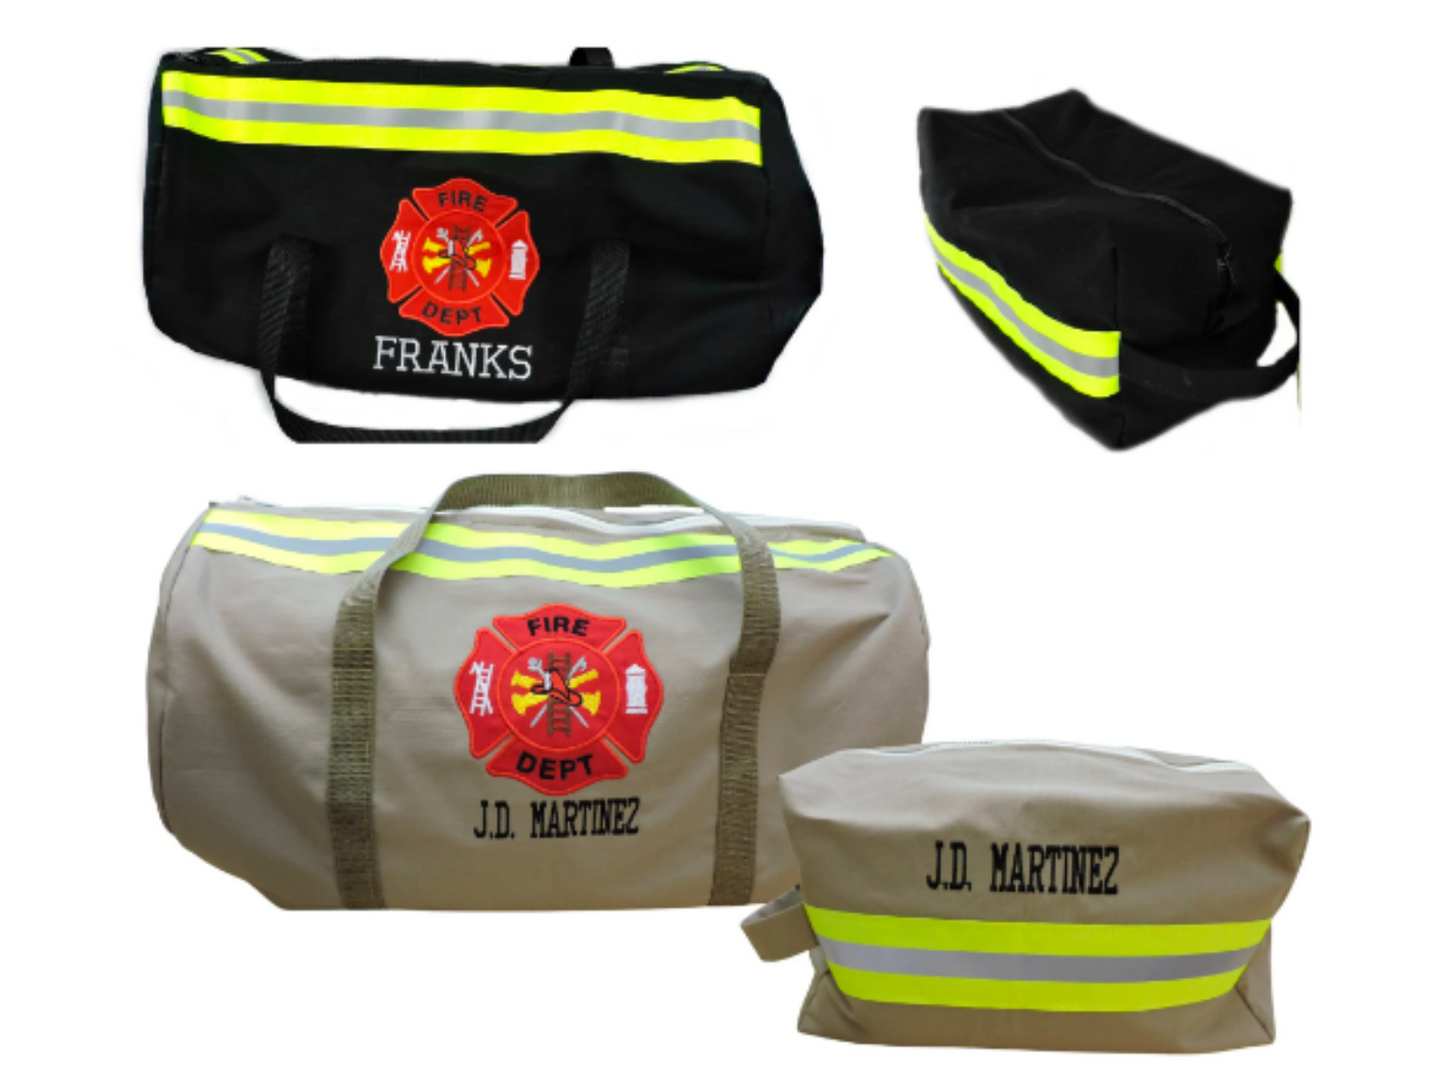 Firefighter Duffle Bag and Toiletry Bag